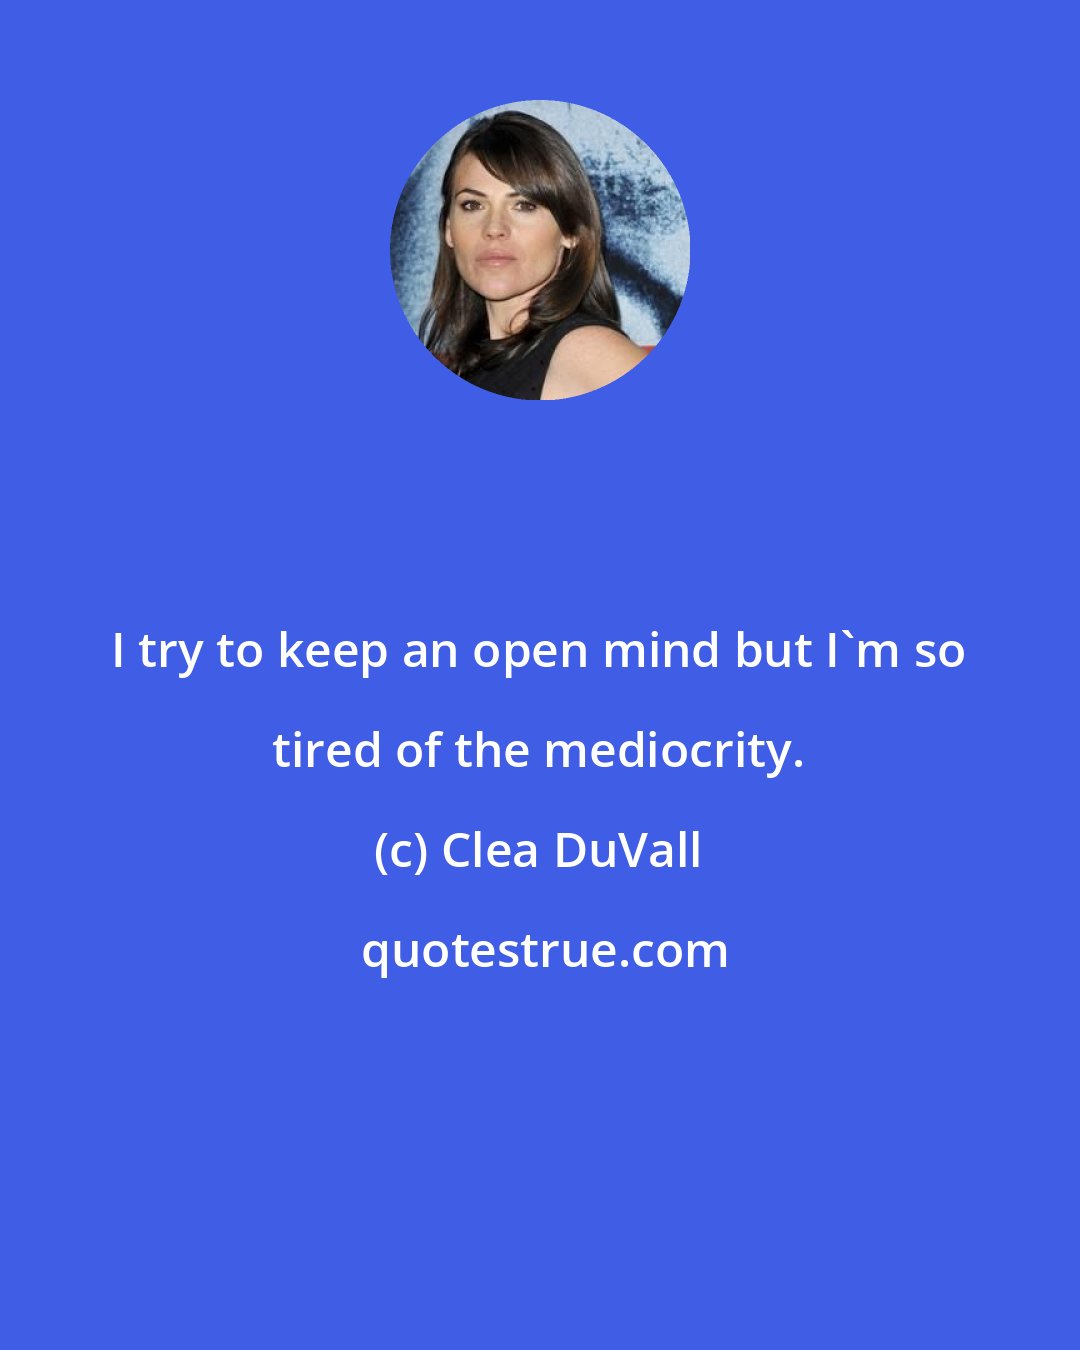 Clea DuVall: I try to keep an open mind but I'm so tired of the mediocrity.